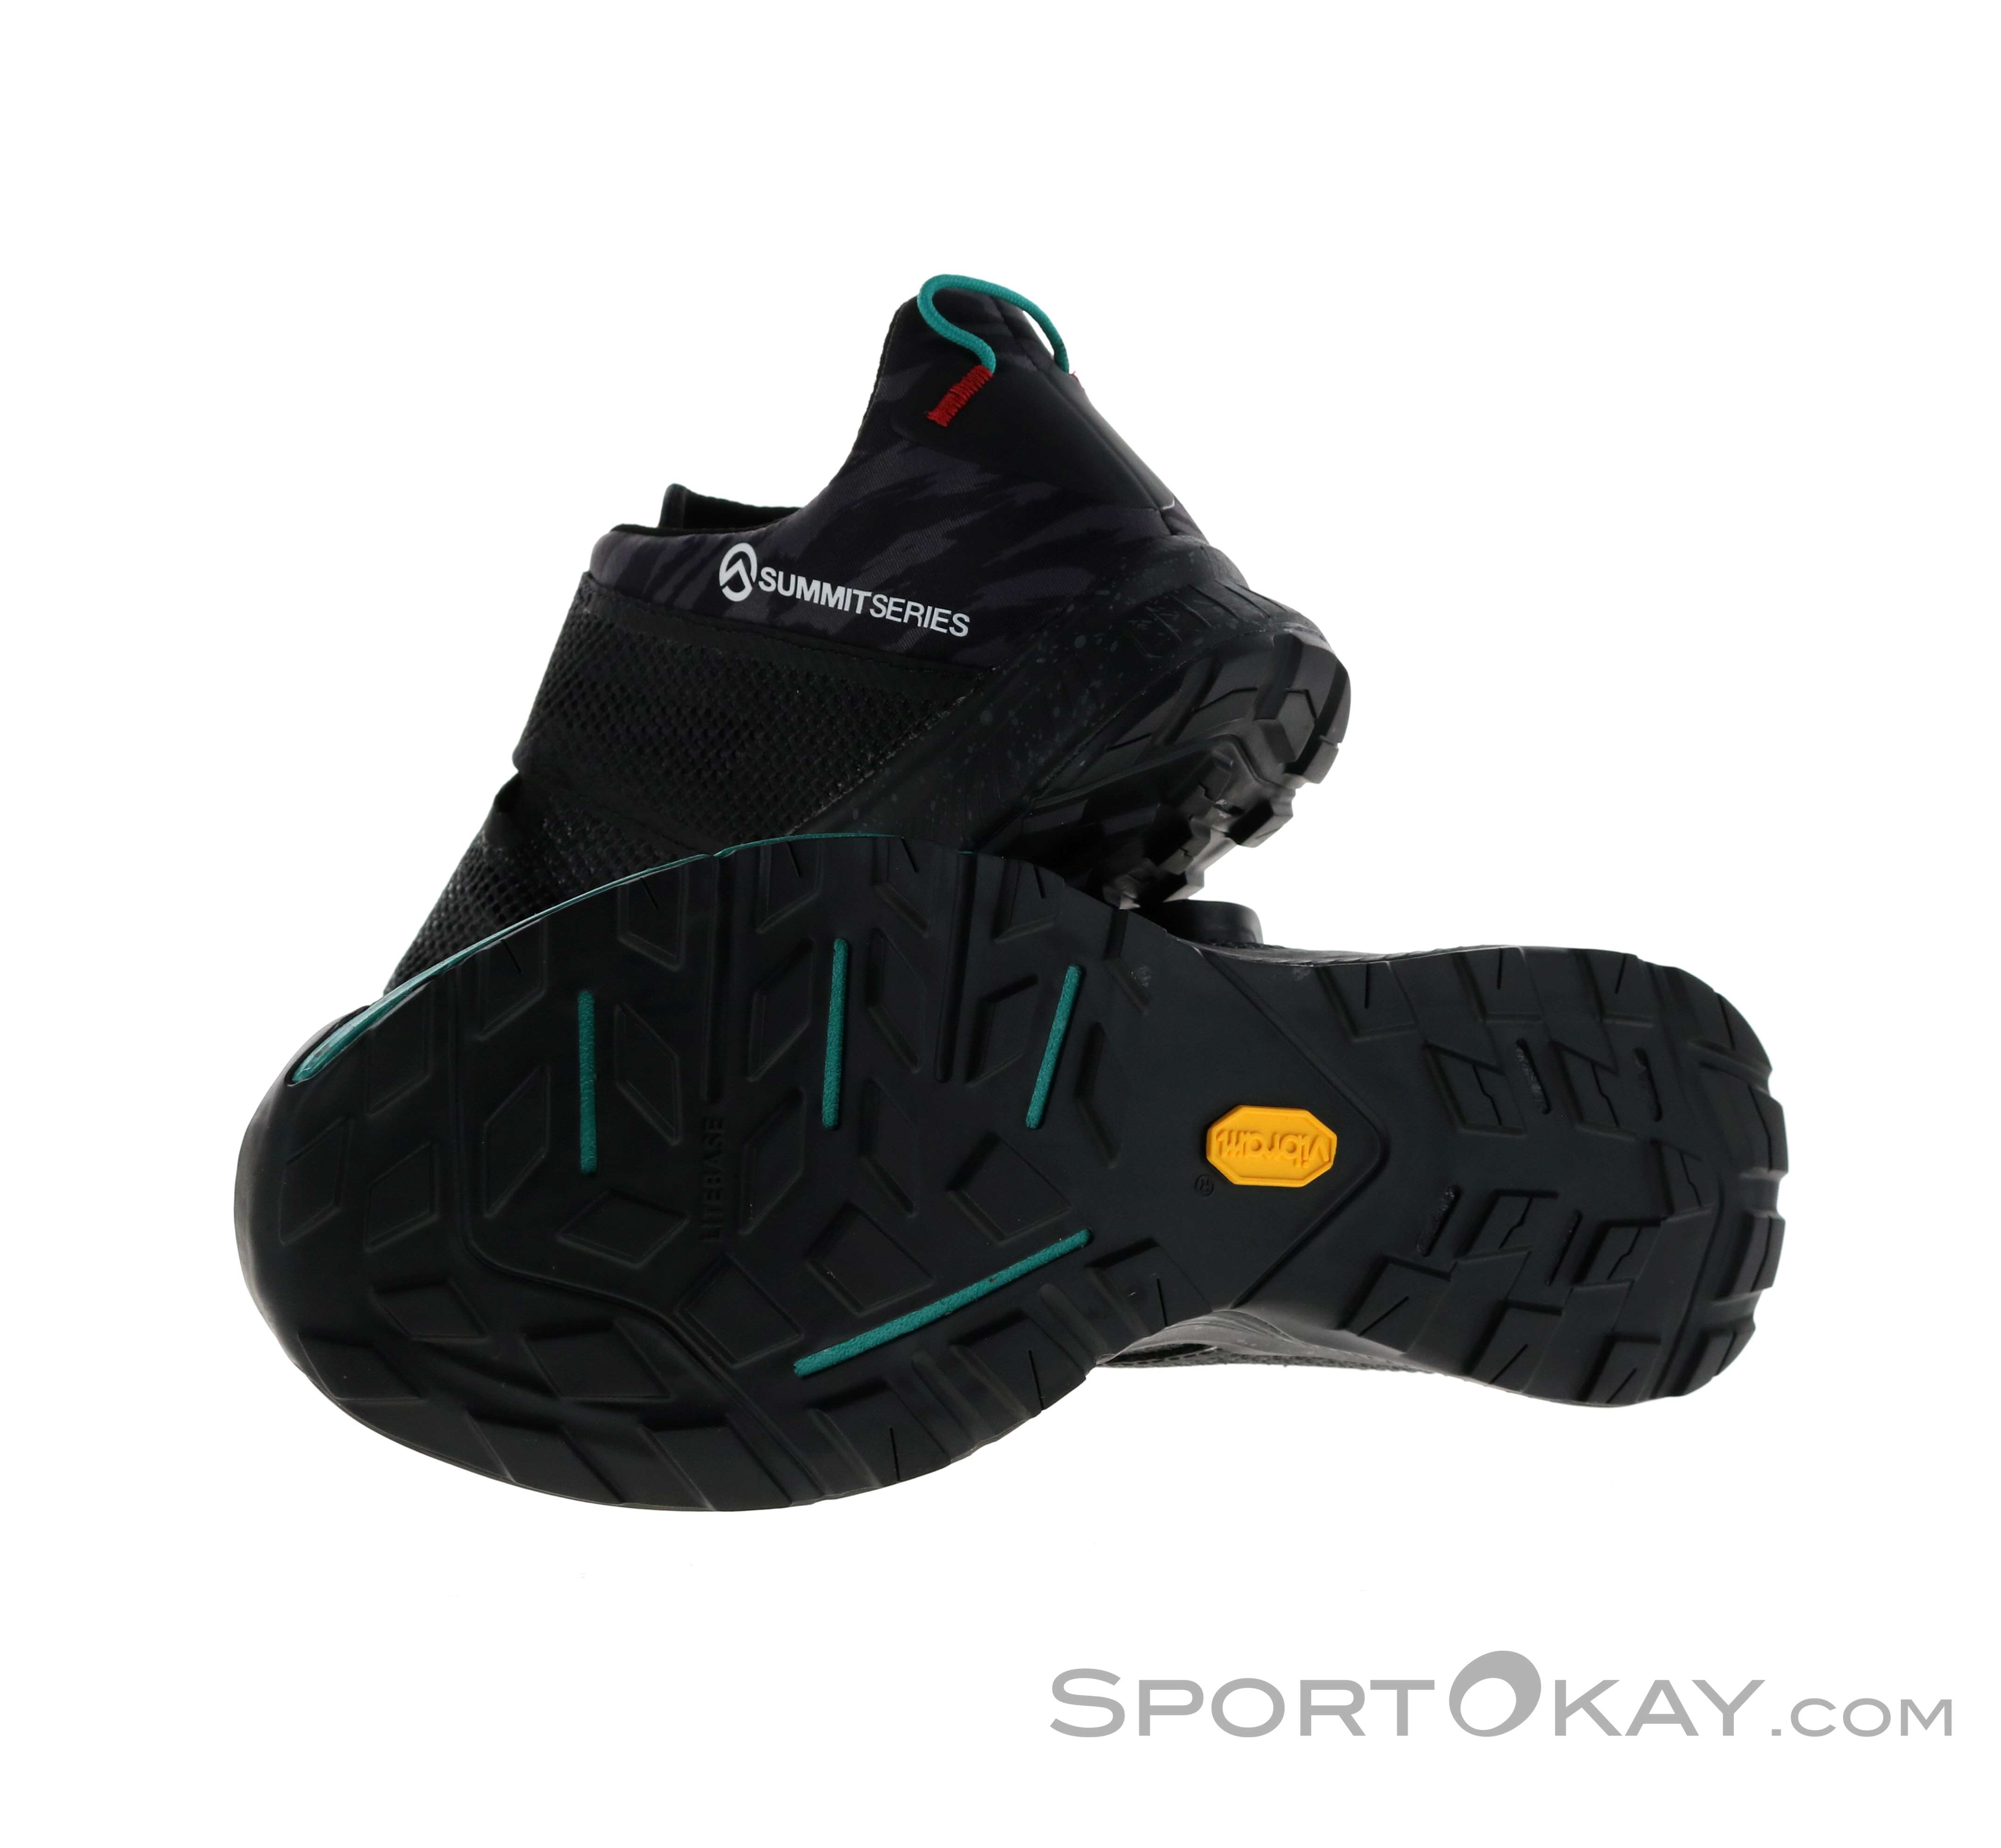 The North Face Summit Cragstone Pro Shoes review: superlight and